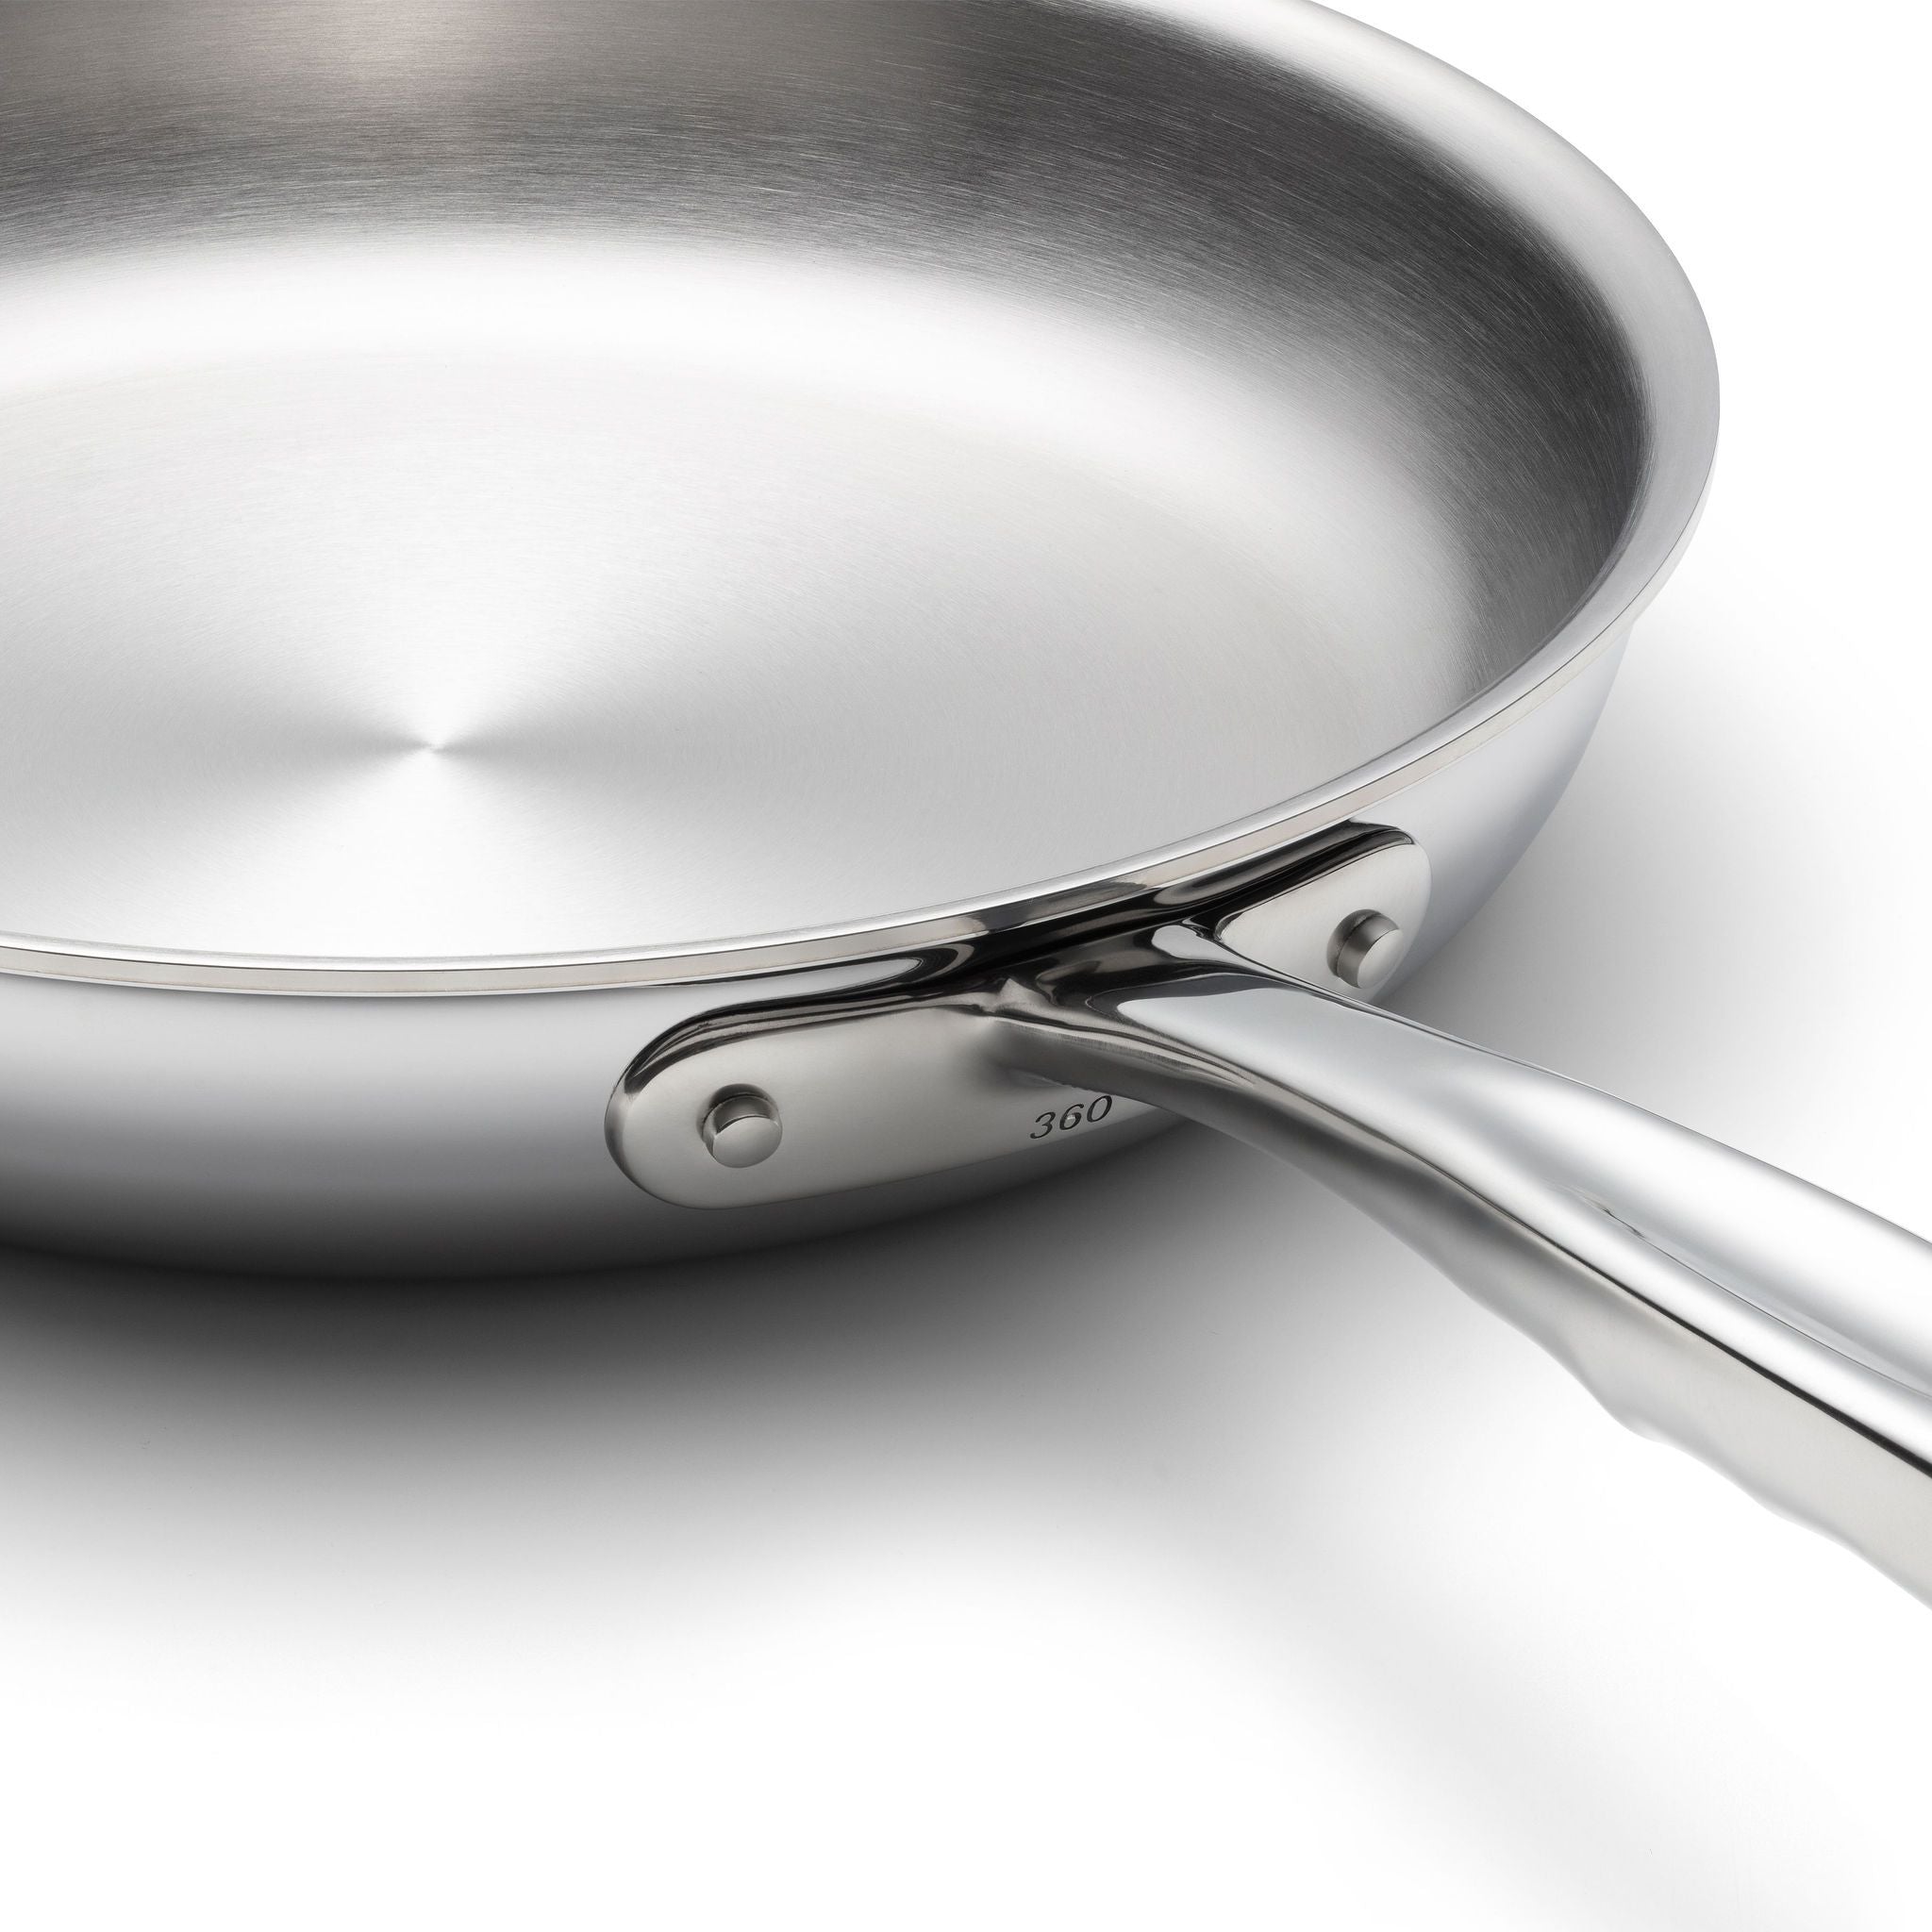 360 Cookware Stainless Steel 10 Inch Fry Pan